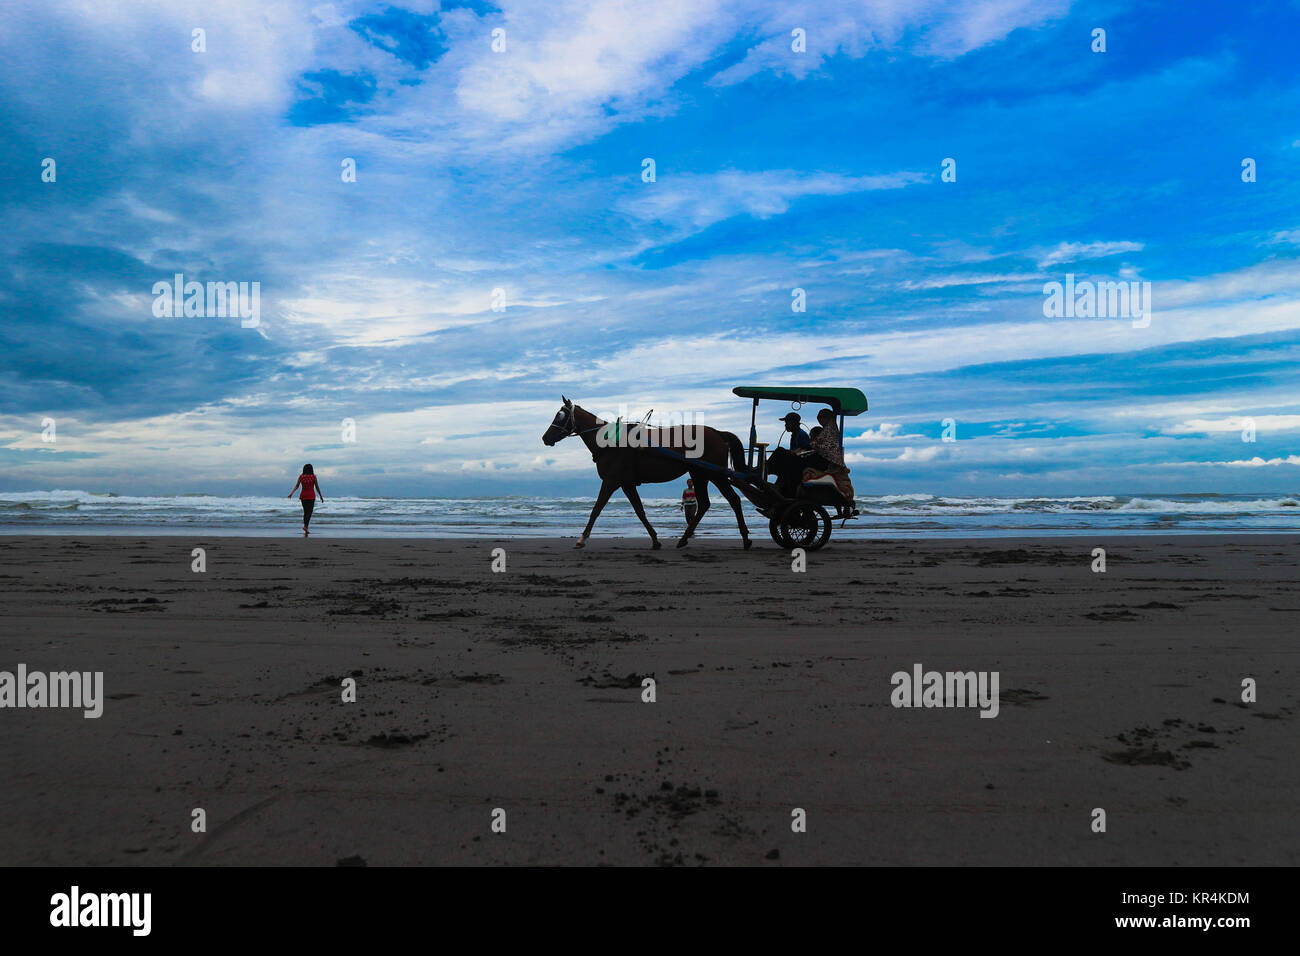 Tourist in a horse drawn carriage on Parangtritis Beach, Central Java, Indonesia. Stock Photo